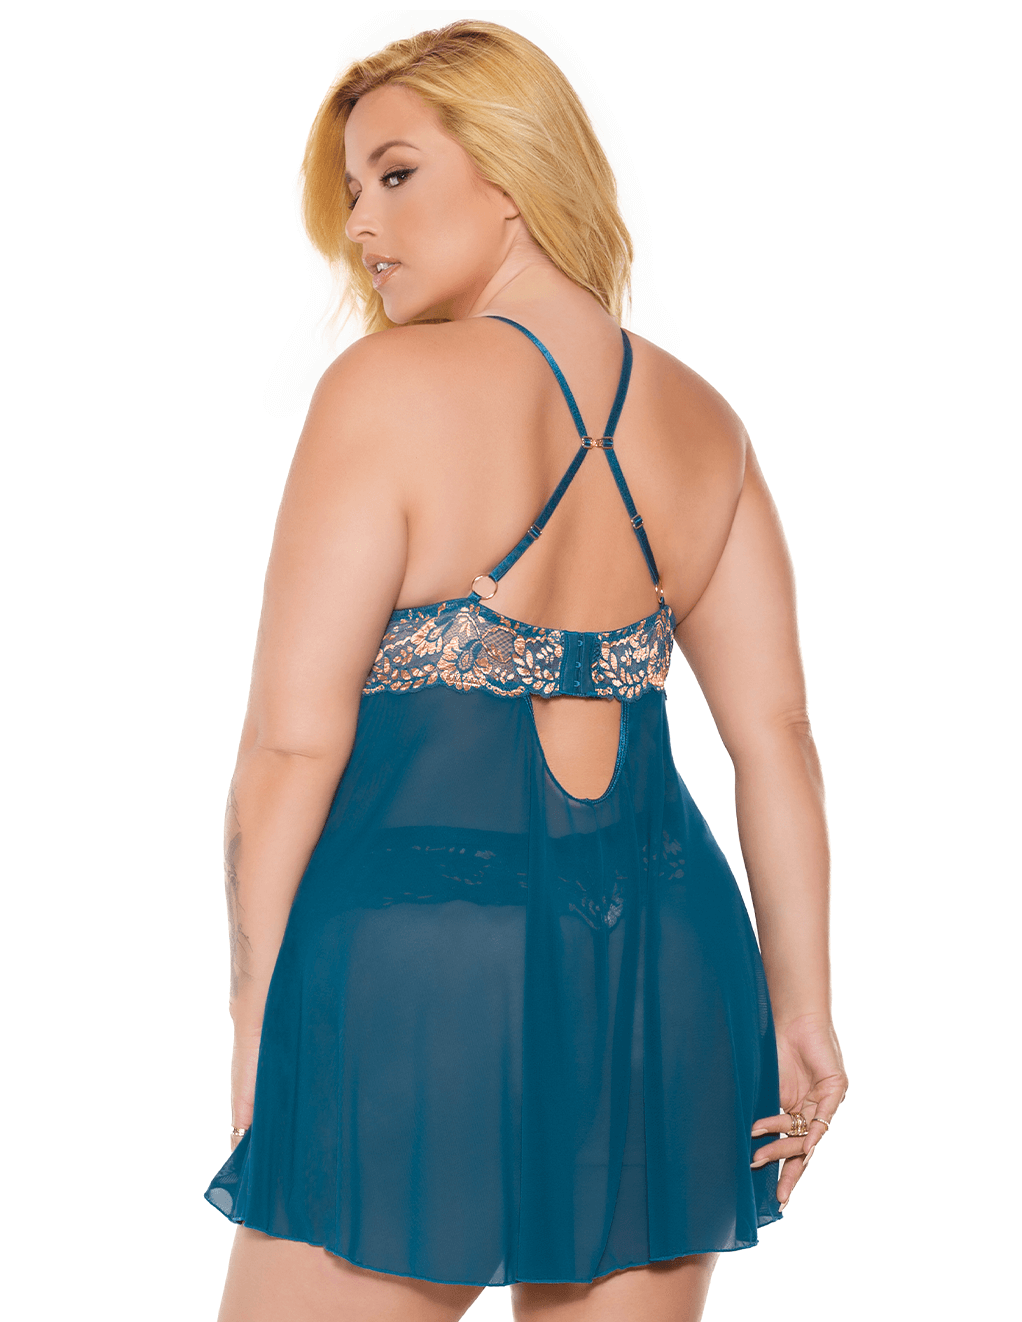 Coquette Floral Embroidered Babydoll Set - Teal - Plus Back